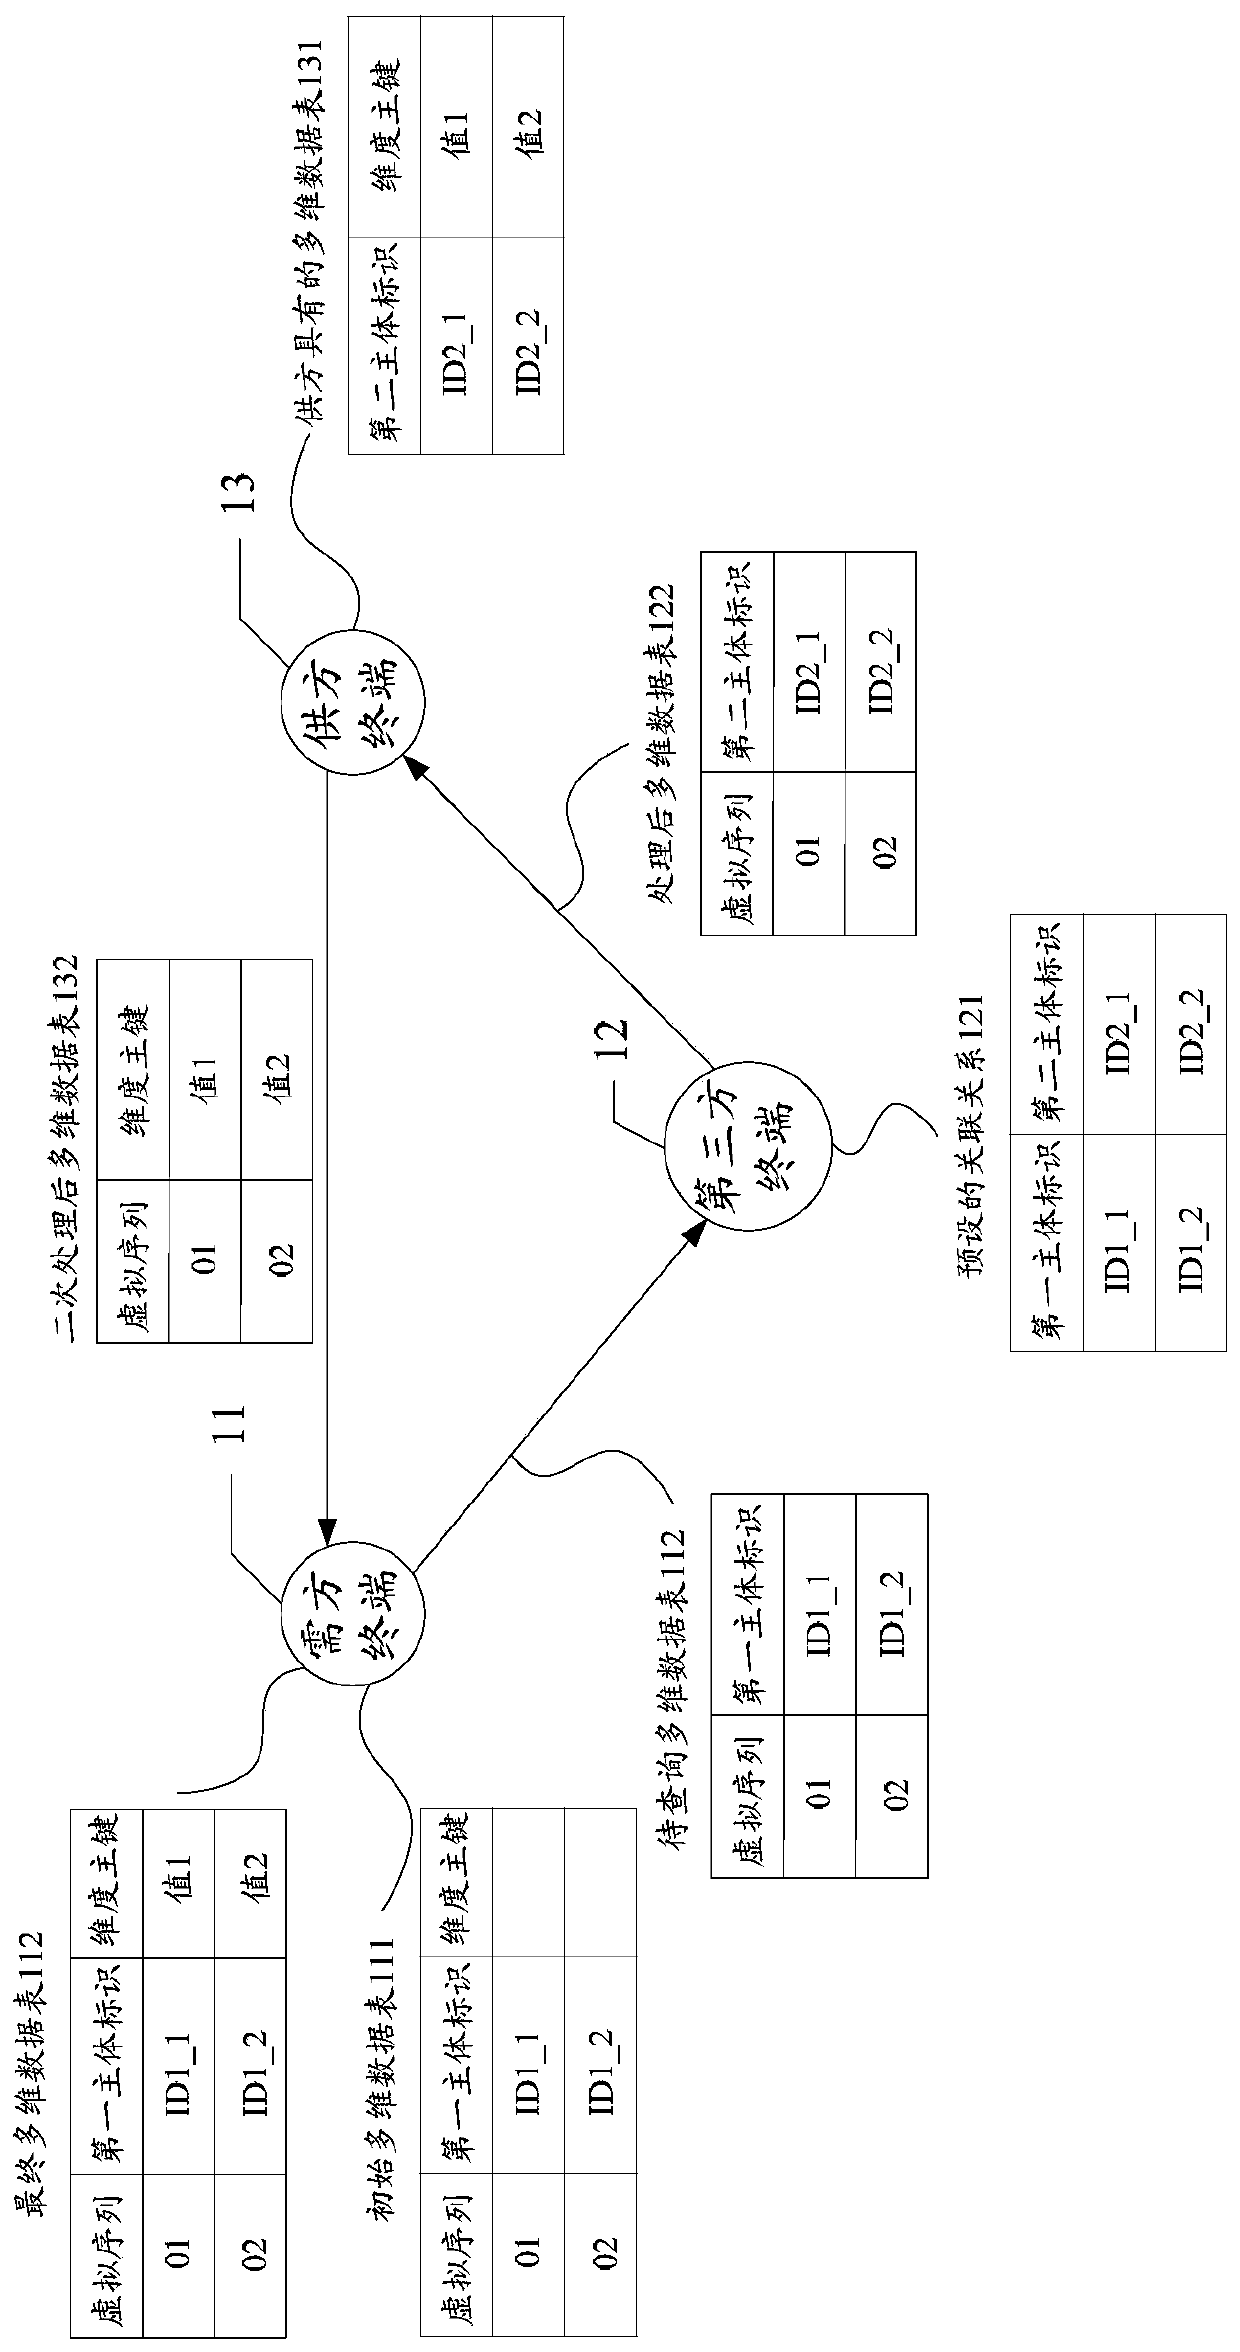 A multi-party data query system and method